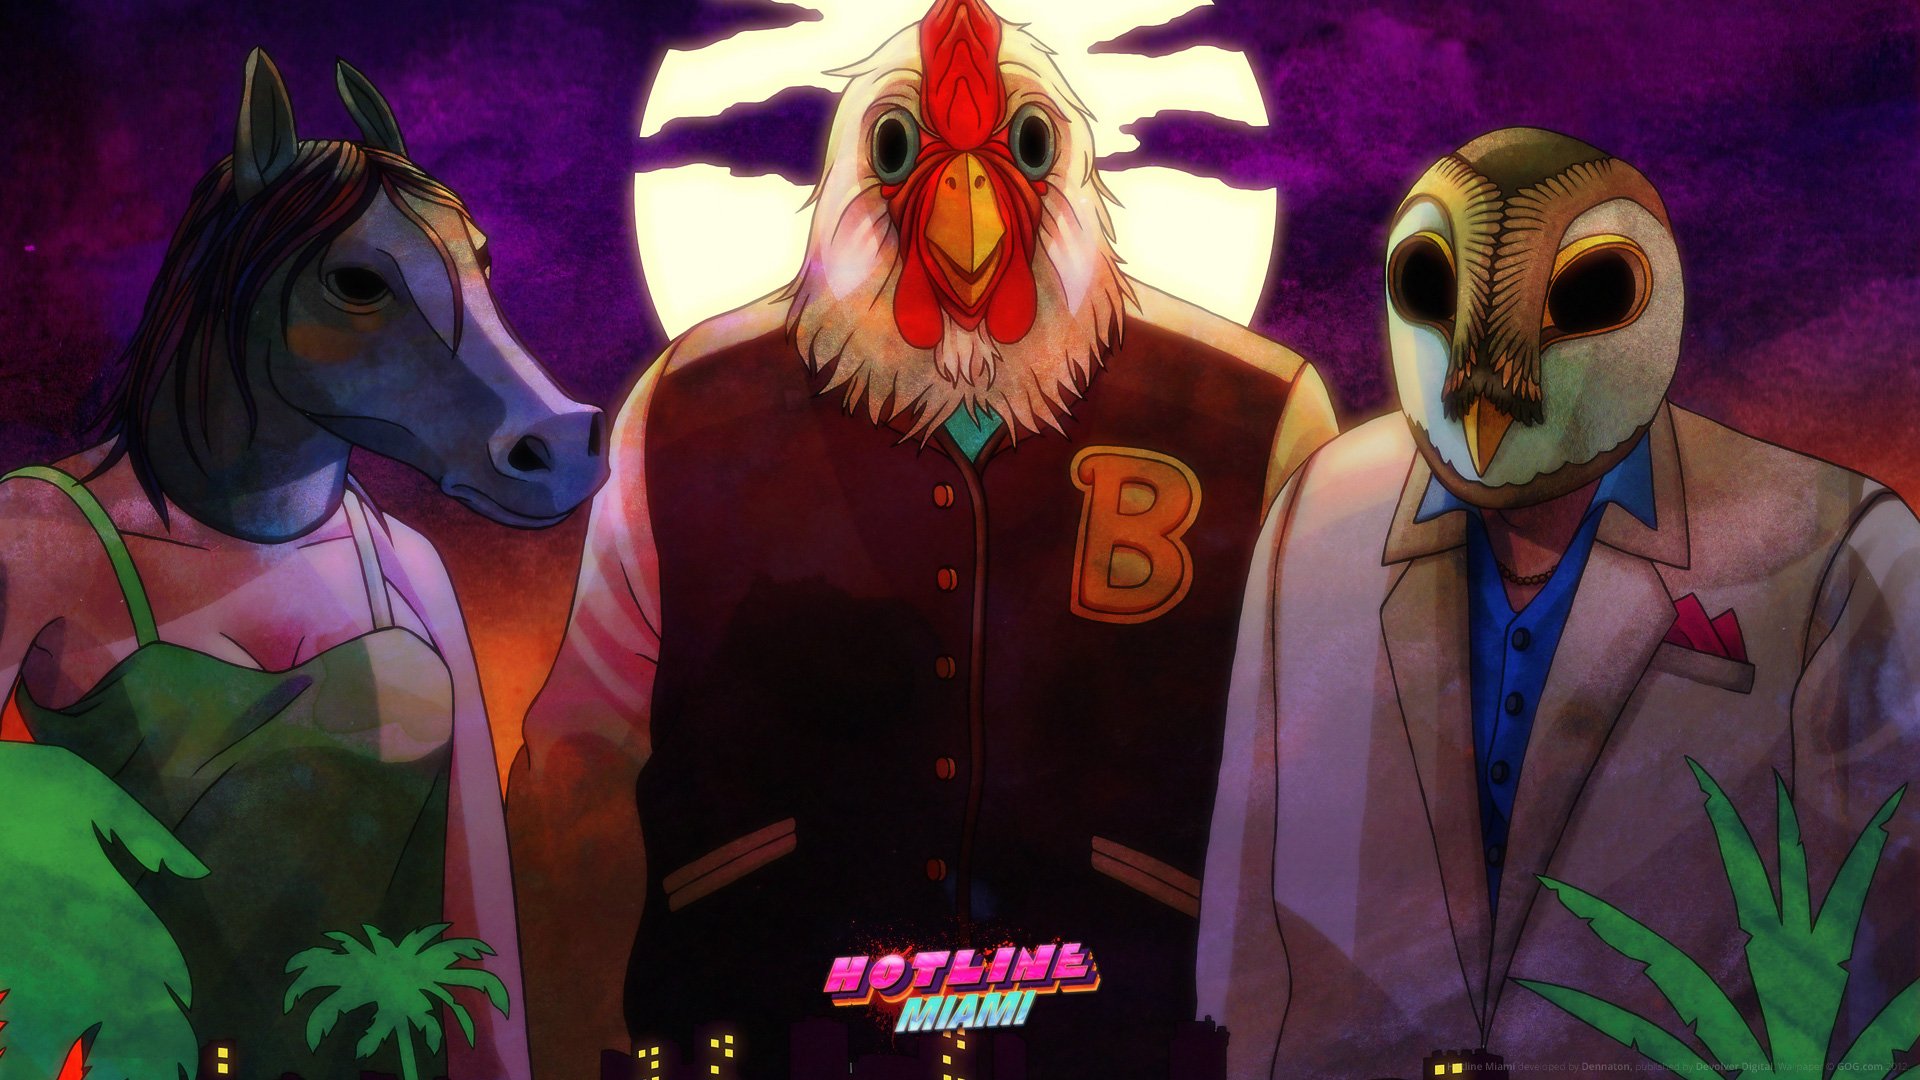 Amazing Hotline Miami Pictures & Backgrounds